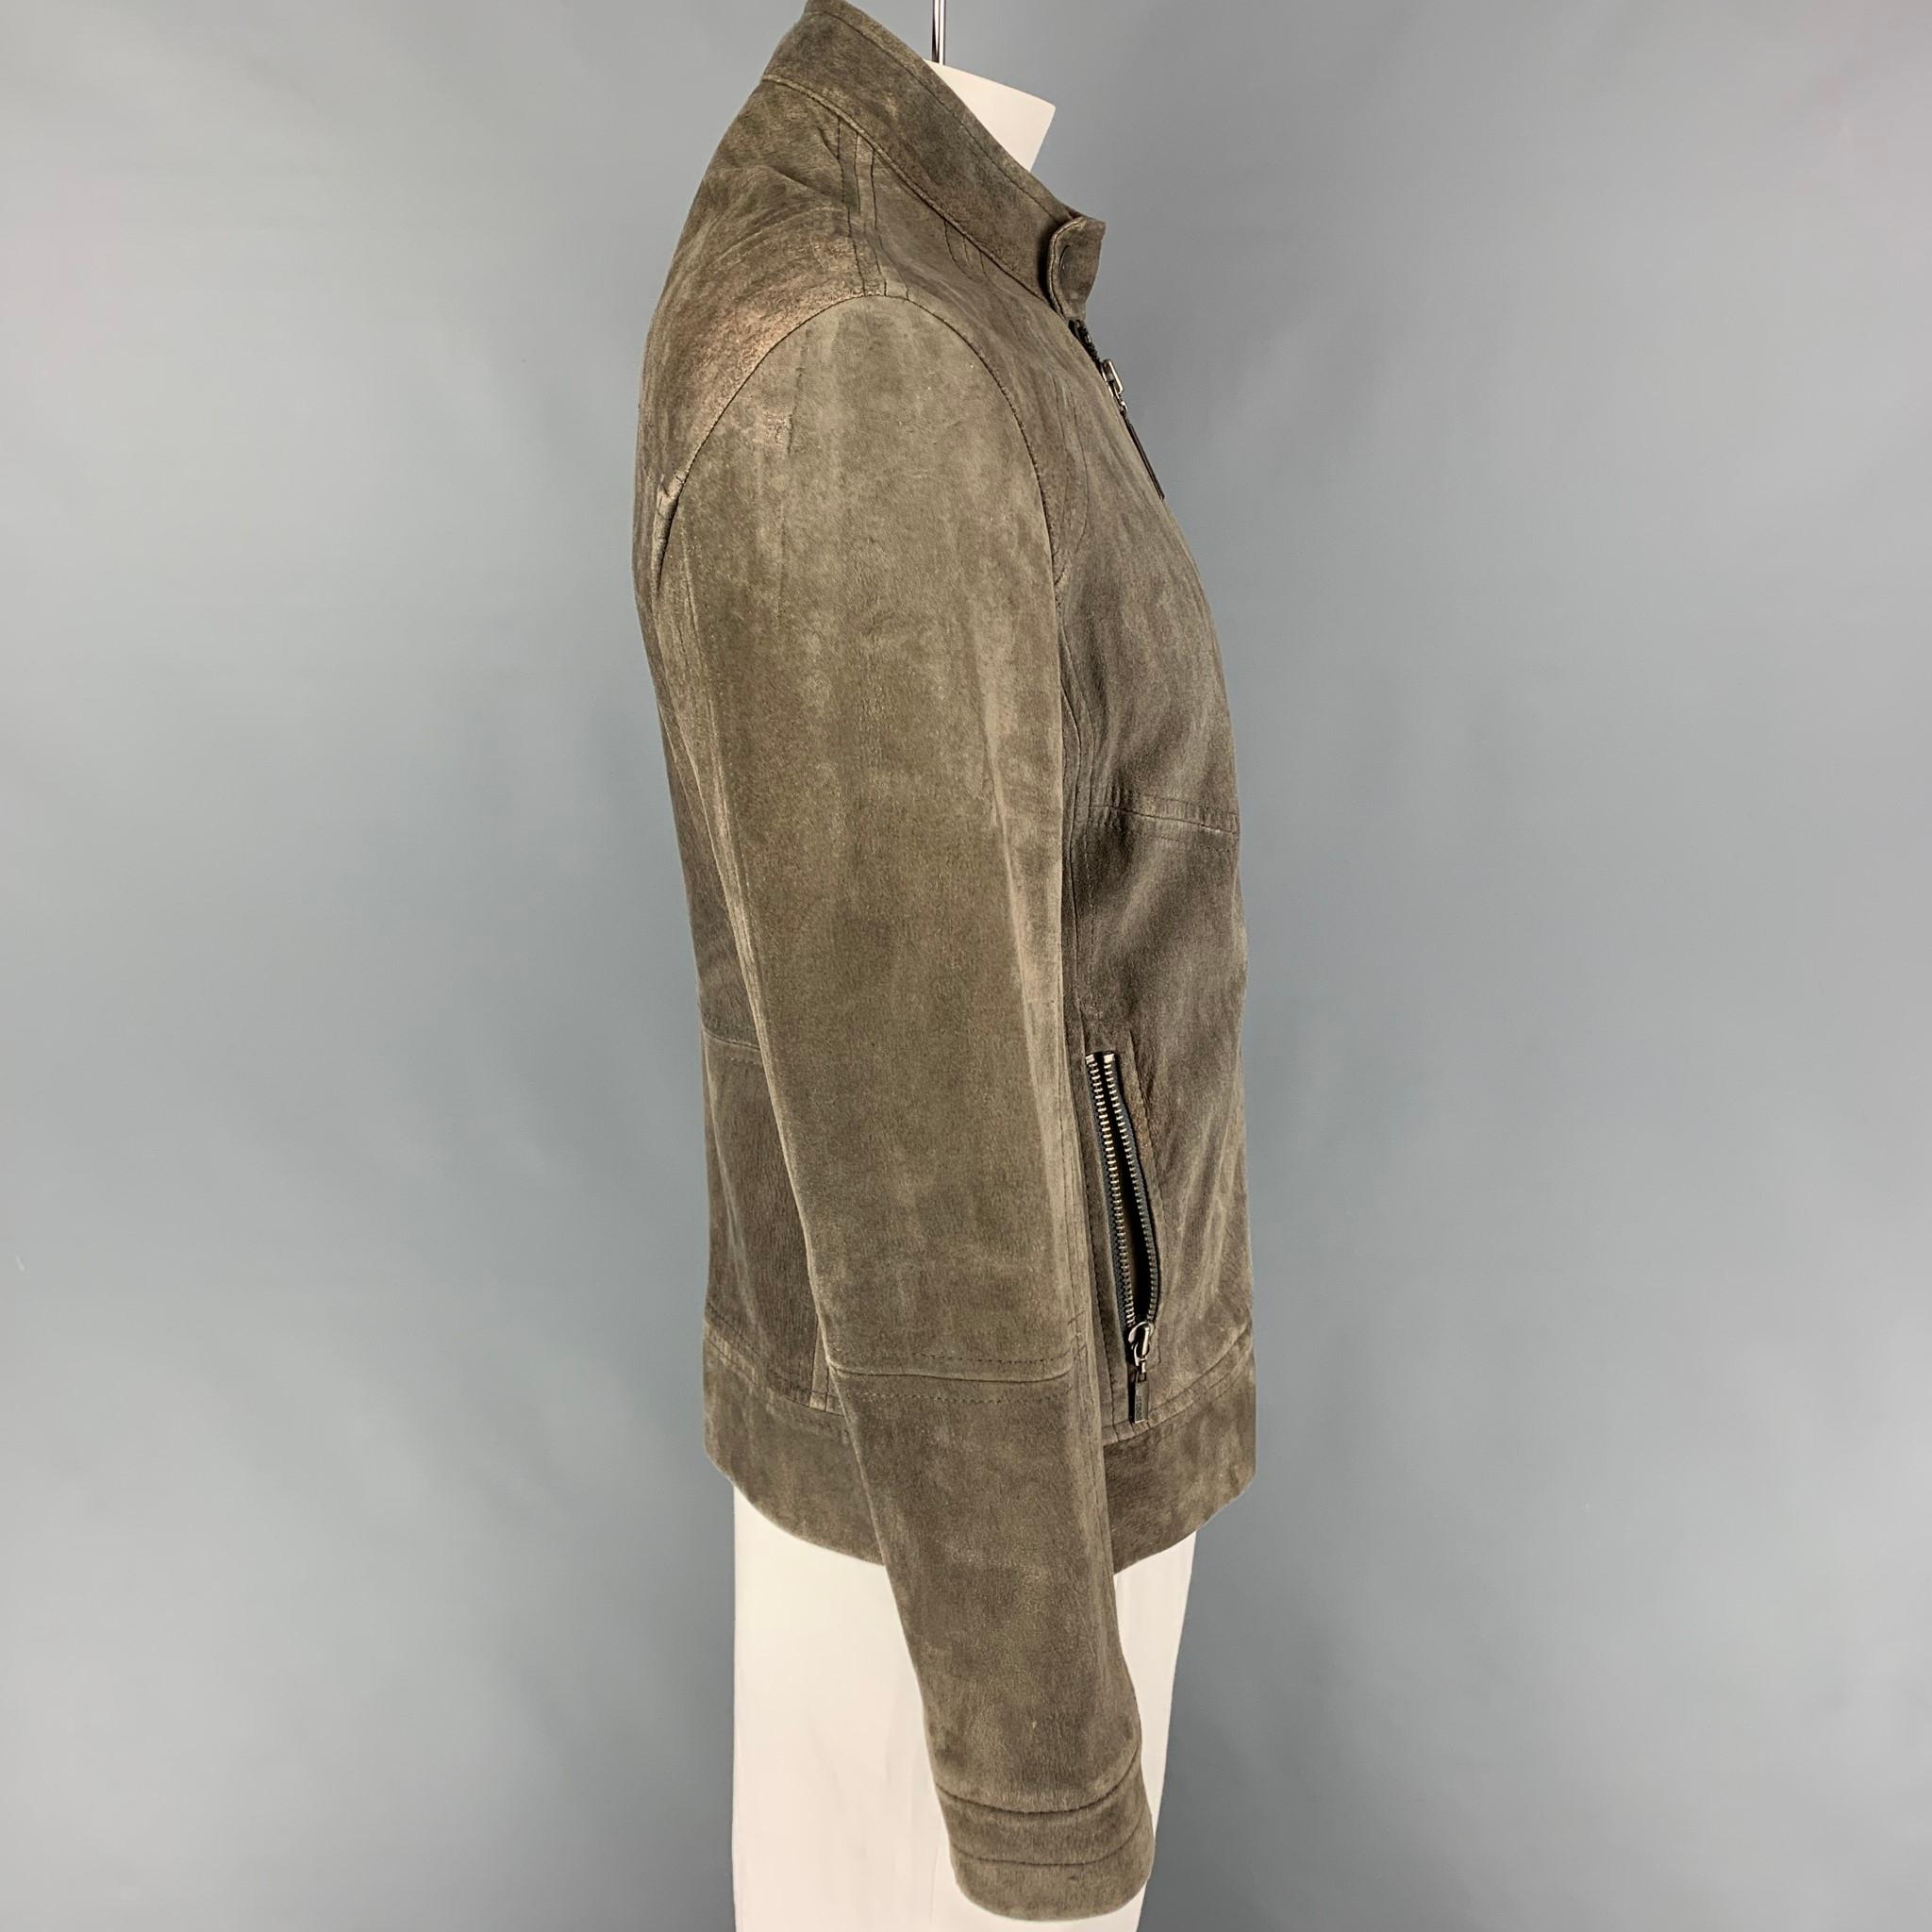 JUST CAVALLI jacket comes in a moss distressed suede featuring a snap button collar strap, zipper pockets, and a full zip up closure. 

Good Pre-Owned Condition. Fabric tag removed.
Marked: Size tag removed.
Original Retail Price: